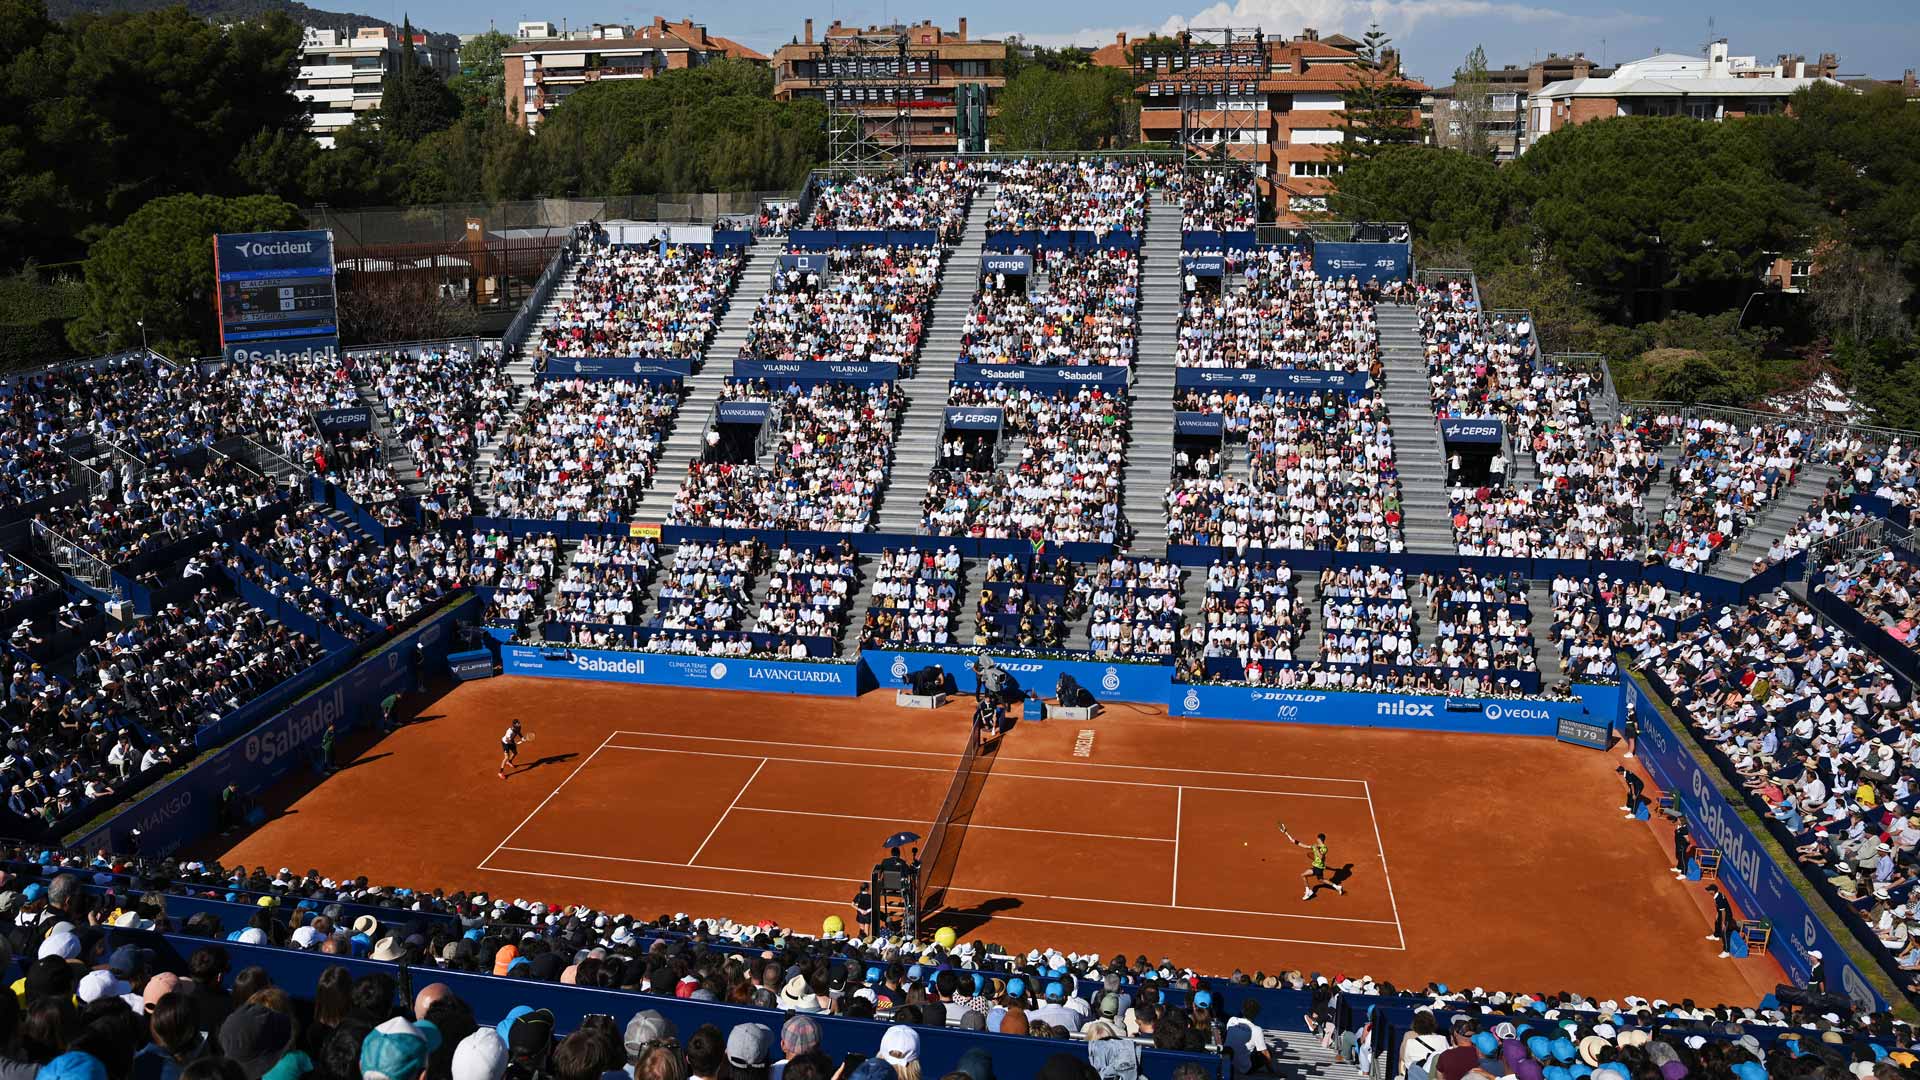 The Barcelona Open Banc Sabadell is an ATP 500 in Spain.